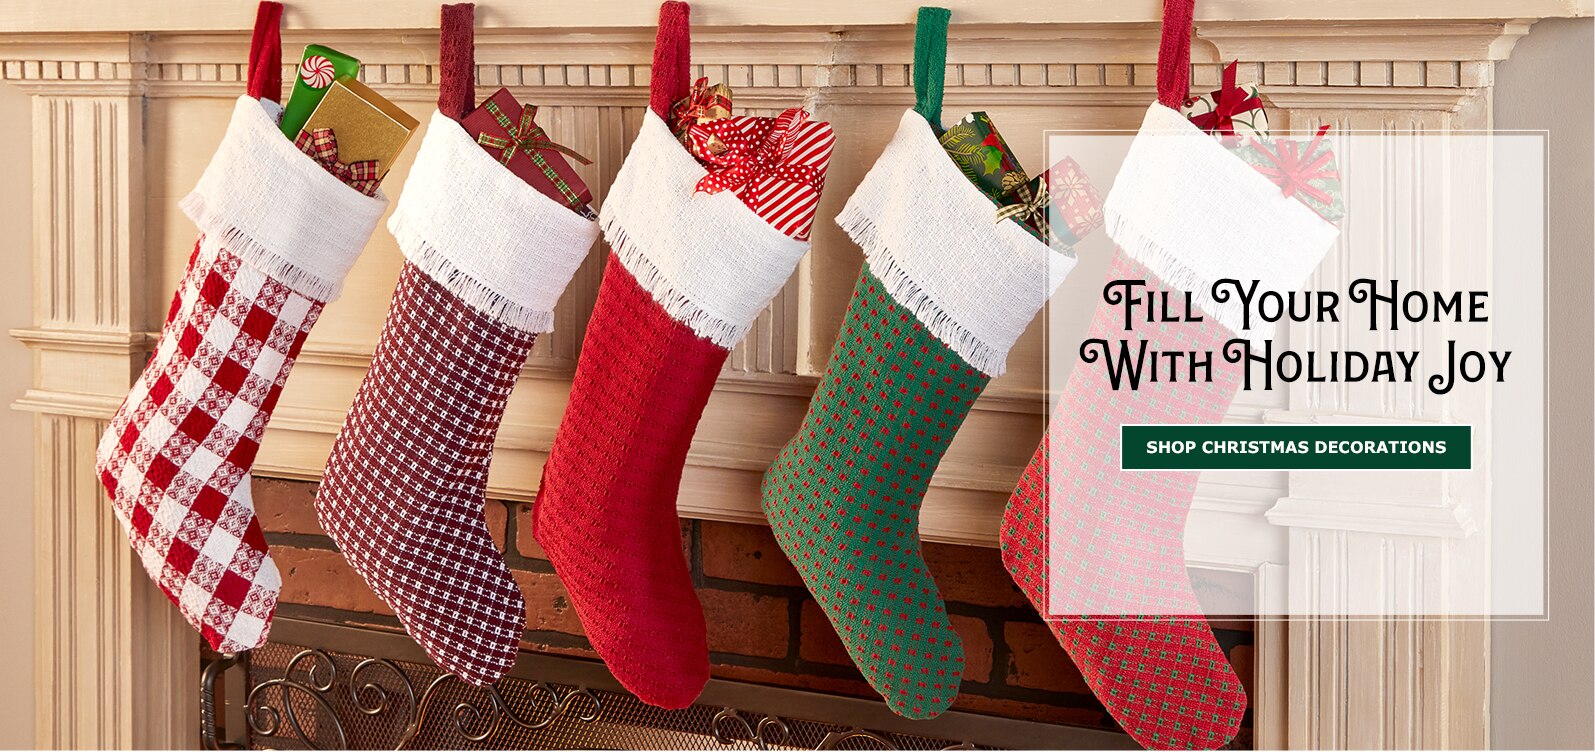 Fill Your Home With Holiday Joy. Shop Christmas Decorations